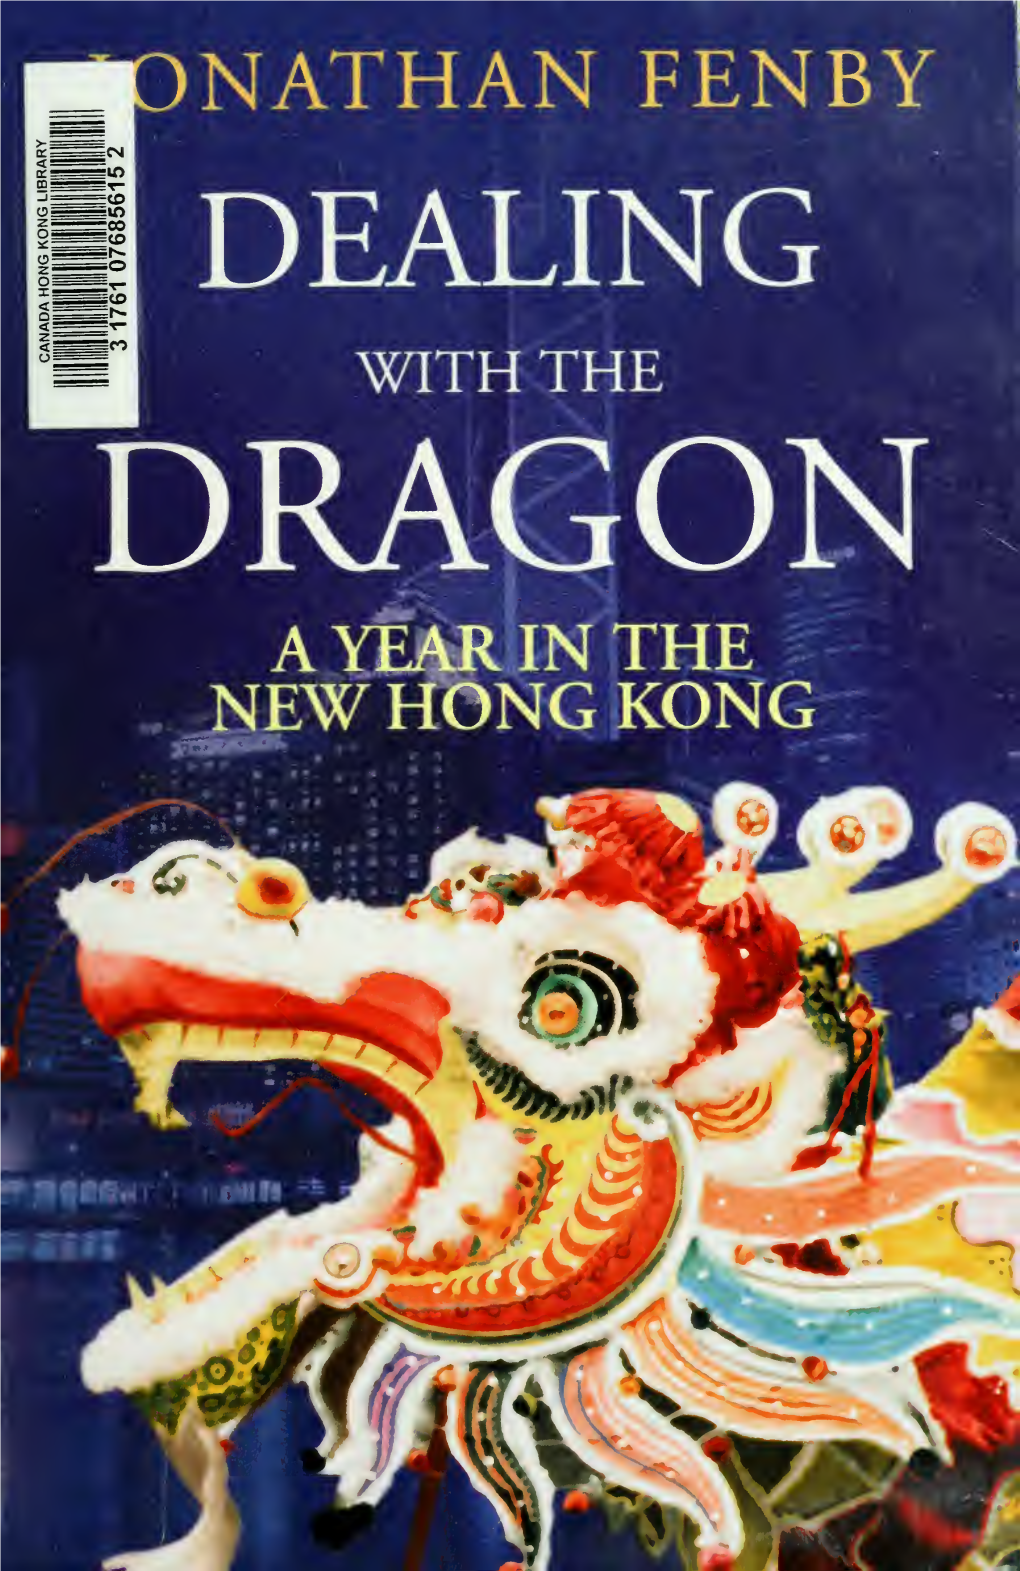 DEALING with the DRAGON a YEAR in the NEW HONG KONG Also by Jonathan Fenby